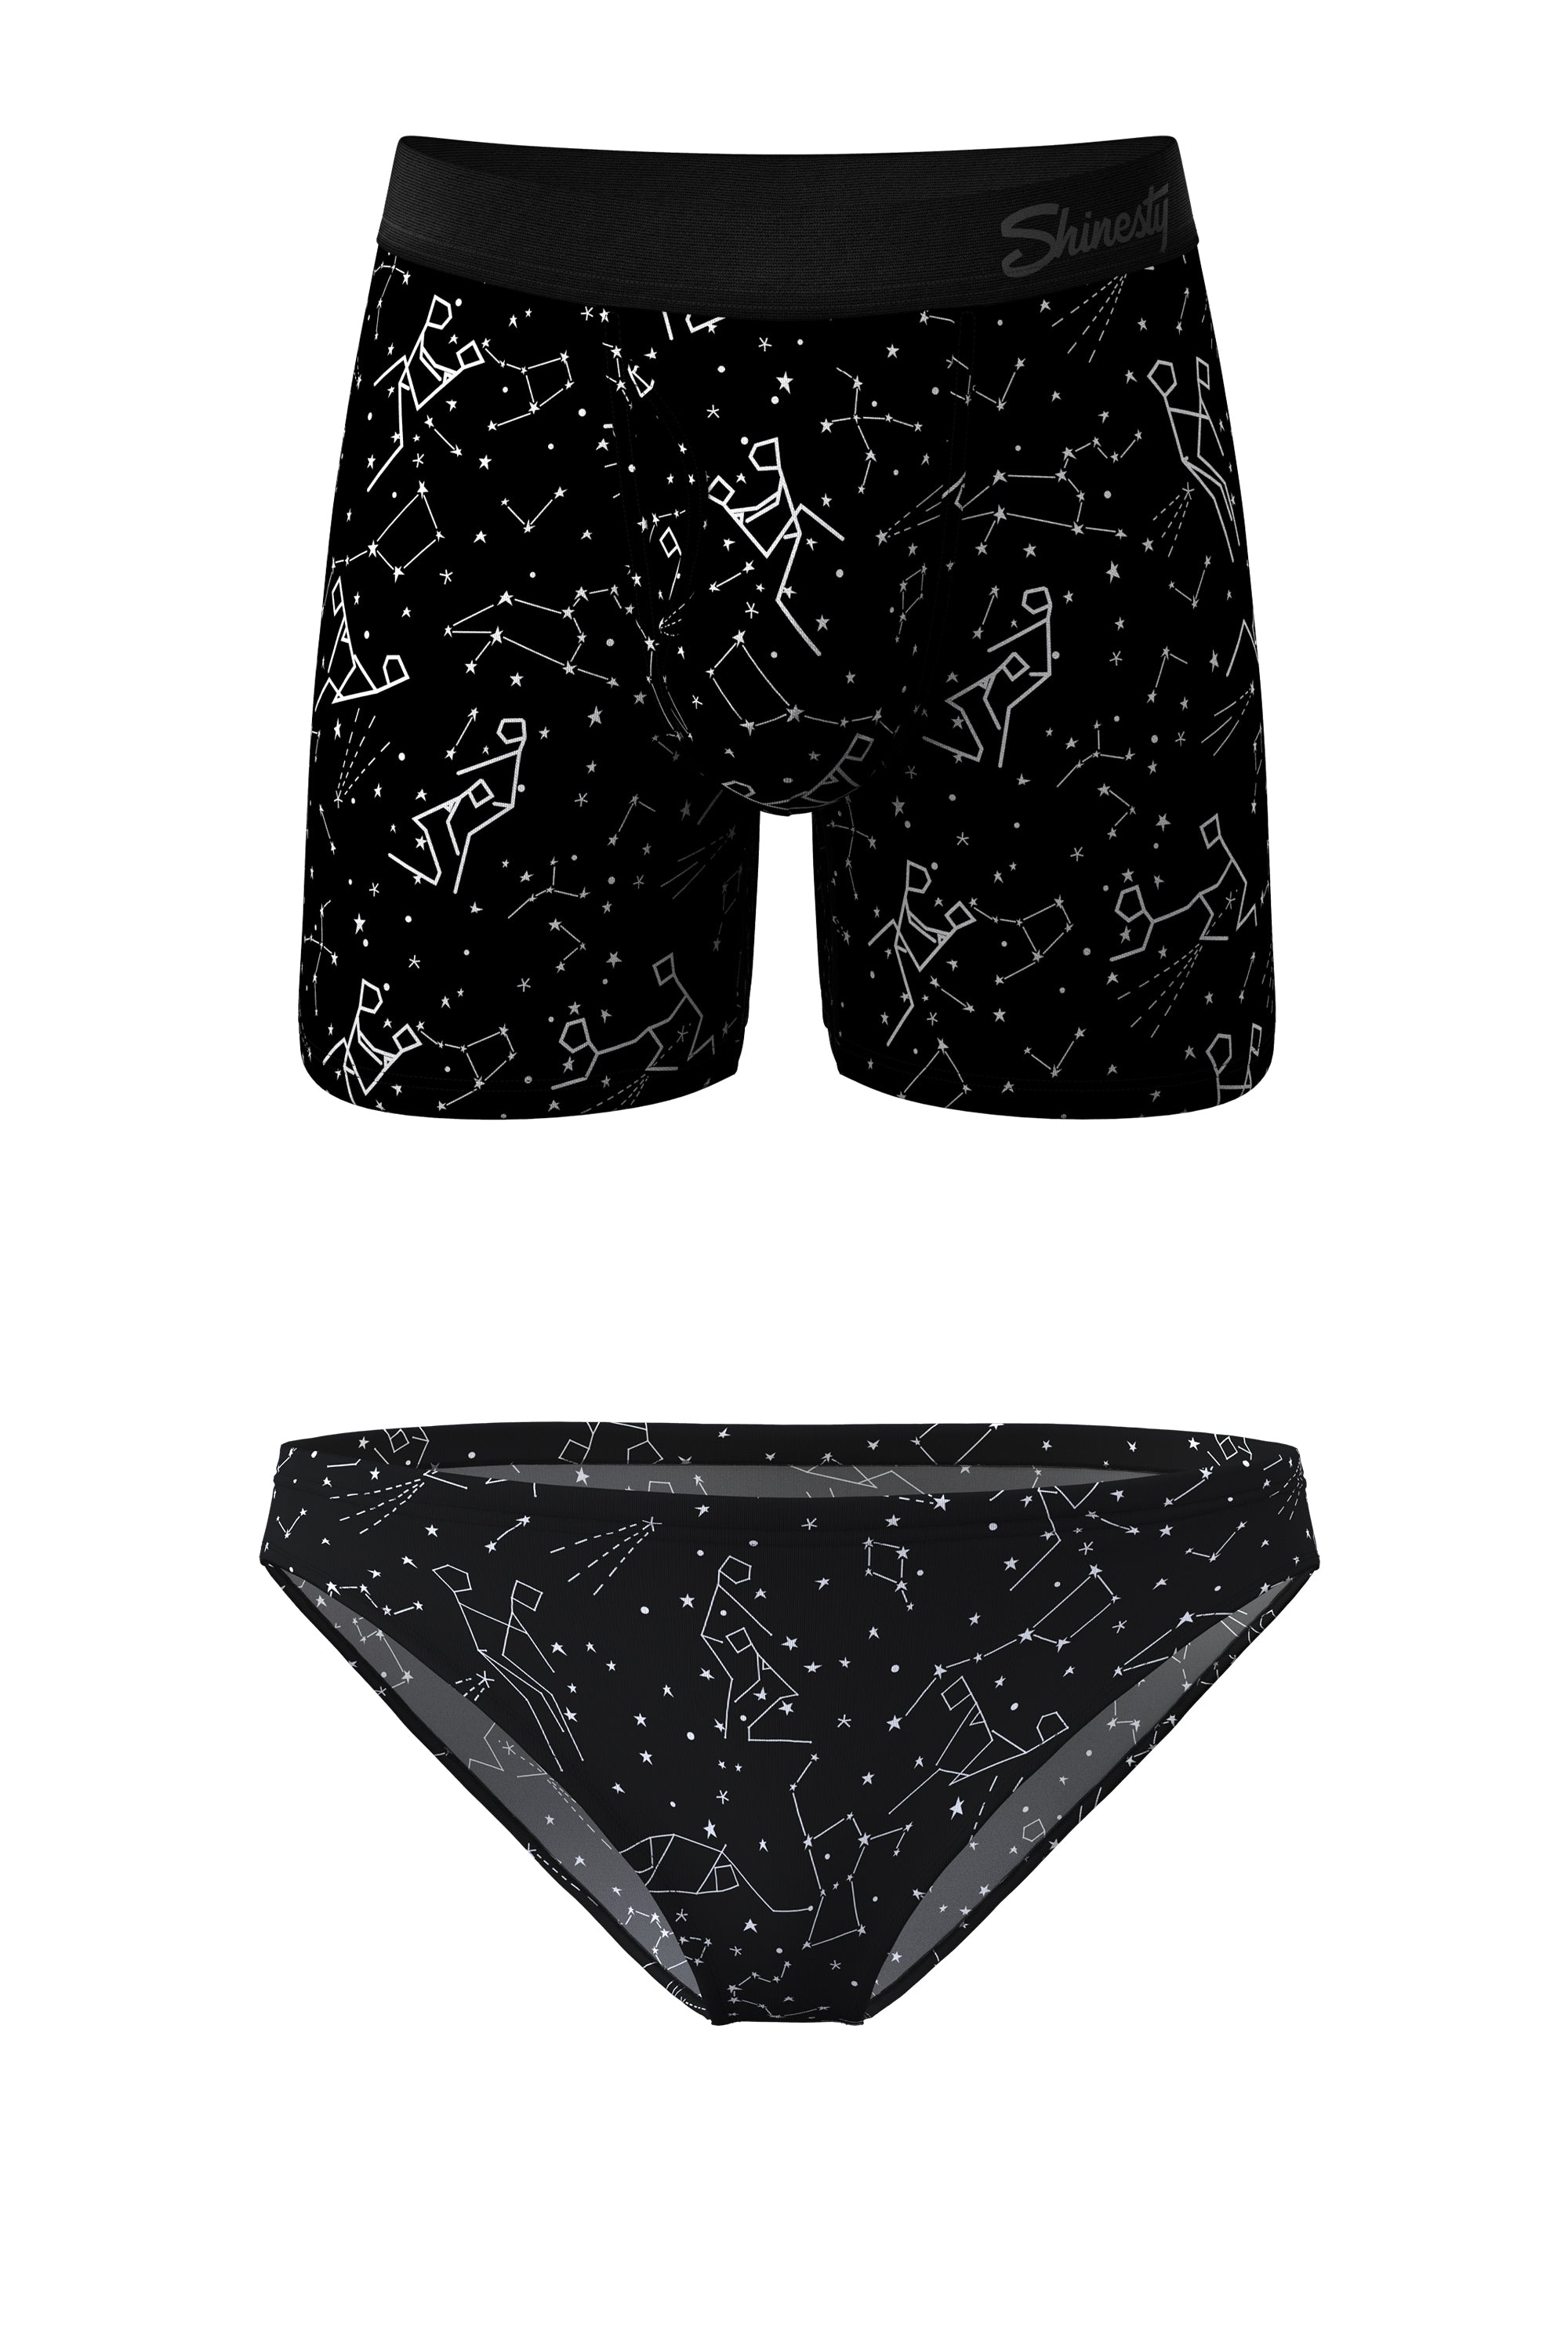 Constellation Ball Hammock® Boxer With Fly and Bikini Matching